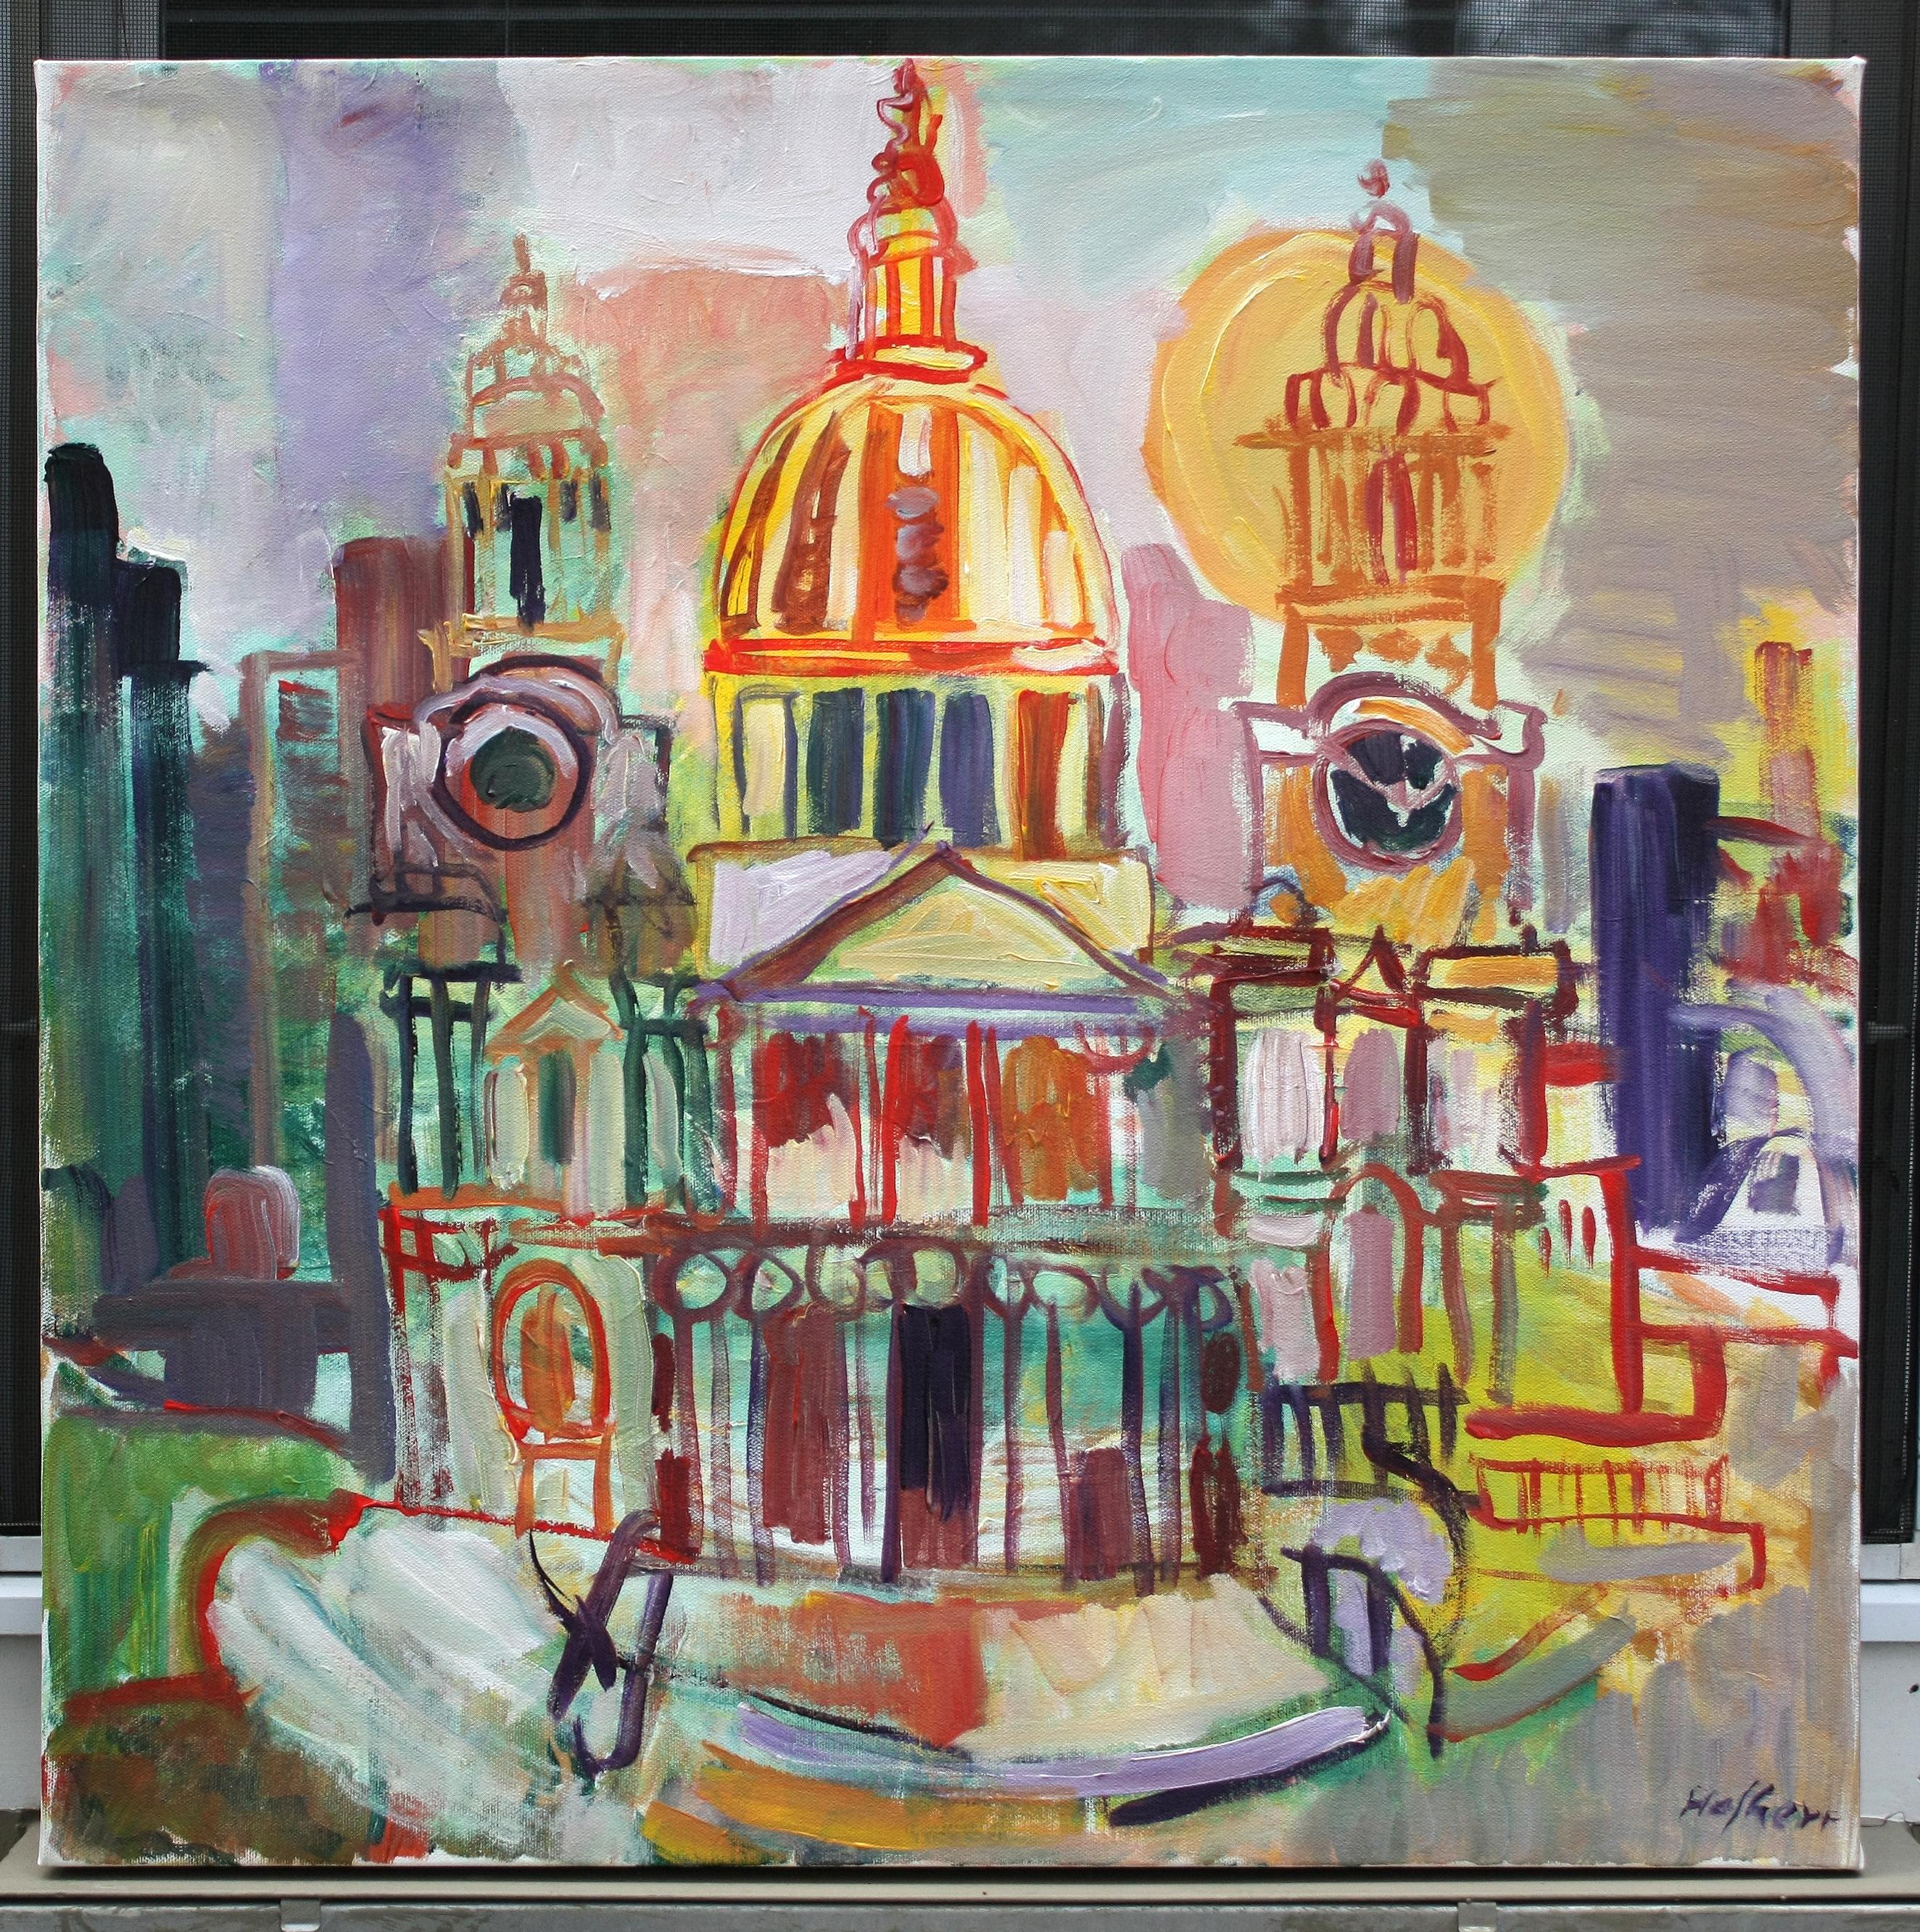 <p>Artist Comments<br>Drawing inspiration from Raoul Dufy's energetic landscapes, this depiction of St. Paul's Cathedral employs a wildly exuberant linear style to outline the structure's basic form. The stylized effect of the vibrant palette and